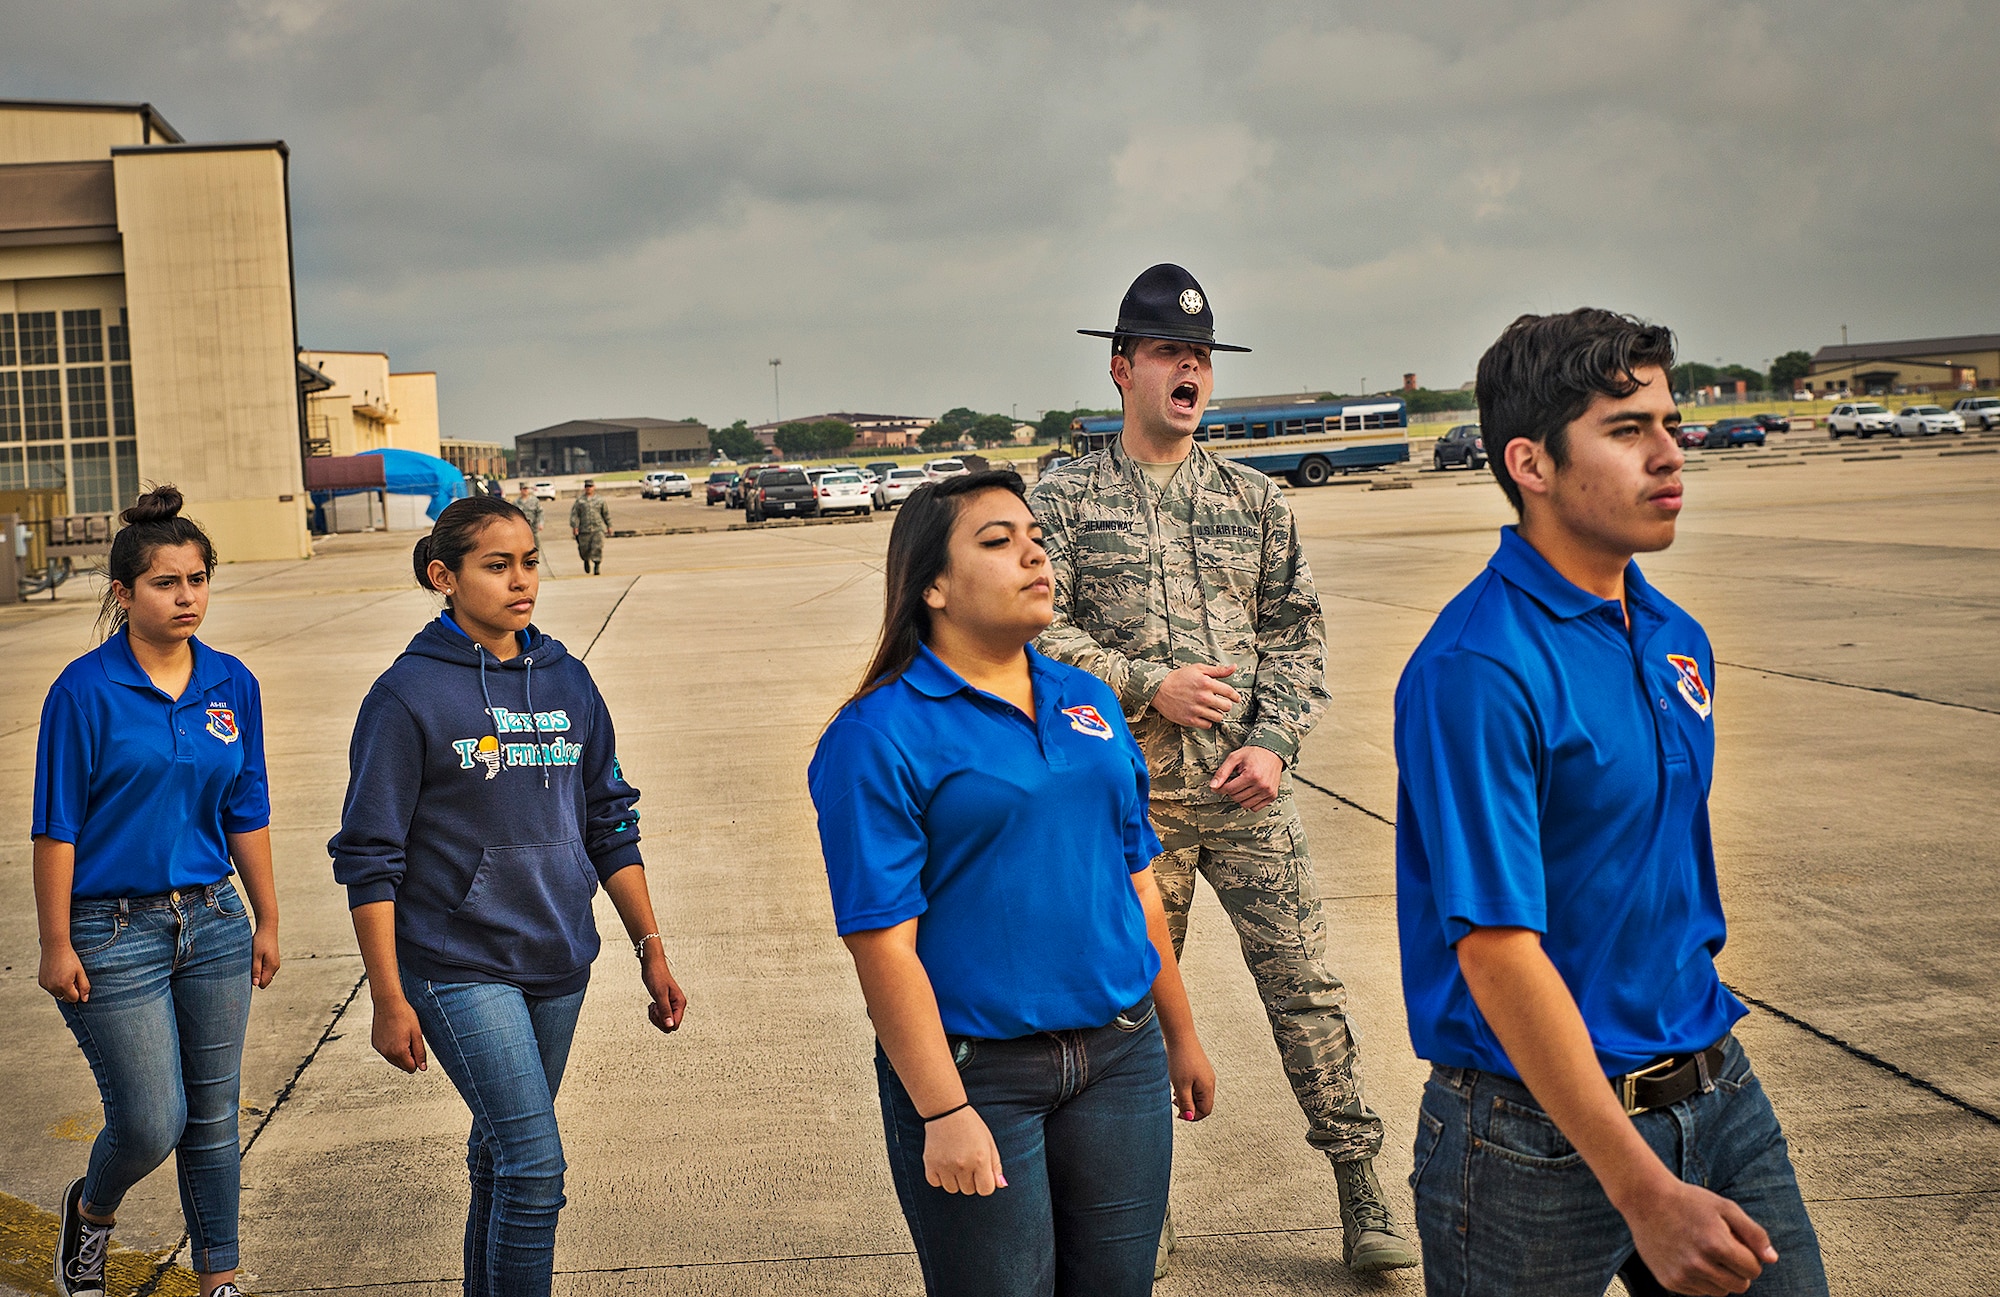 Tech. Sgt. Robert Hemingway, a 433rd Training Squadron military training instructor, yells out commands to Junior ROTC students from John Jay High School May 12, 2016 at Joint Base San Antonio-Lackland, Texas. The students toured the survival, engine, and structural engineering shops at the 433rd Airlift Wing and also saw a Military Working Dog demonstration at the 341st Training Squadron. (U.S. Air Force photo by Benjamin Faske) (released)